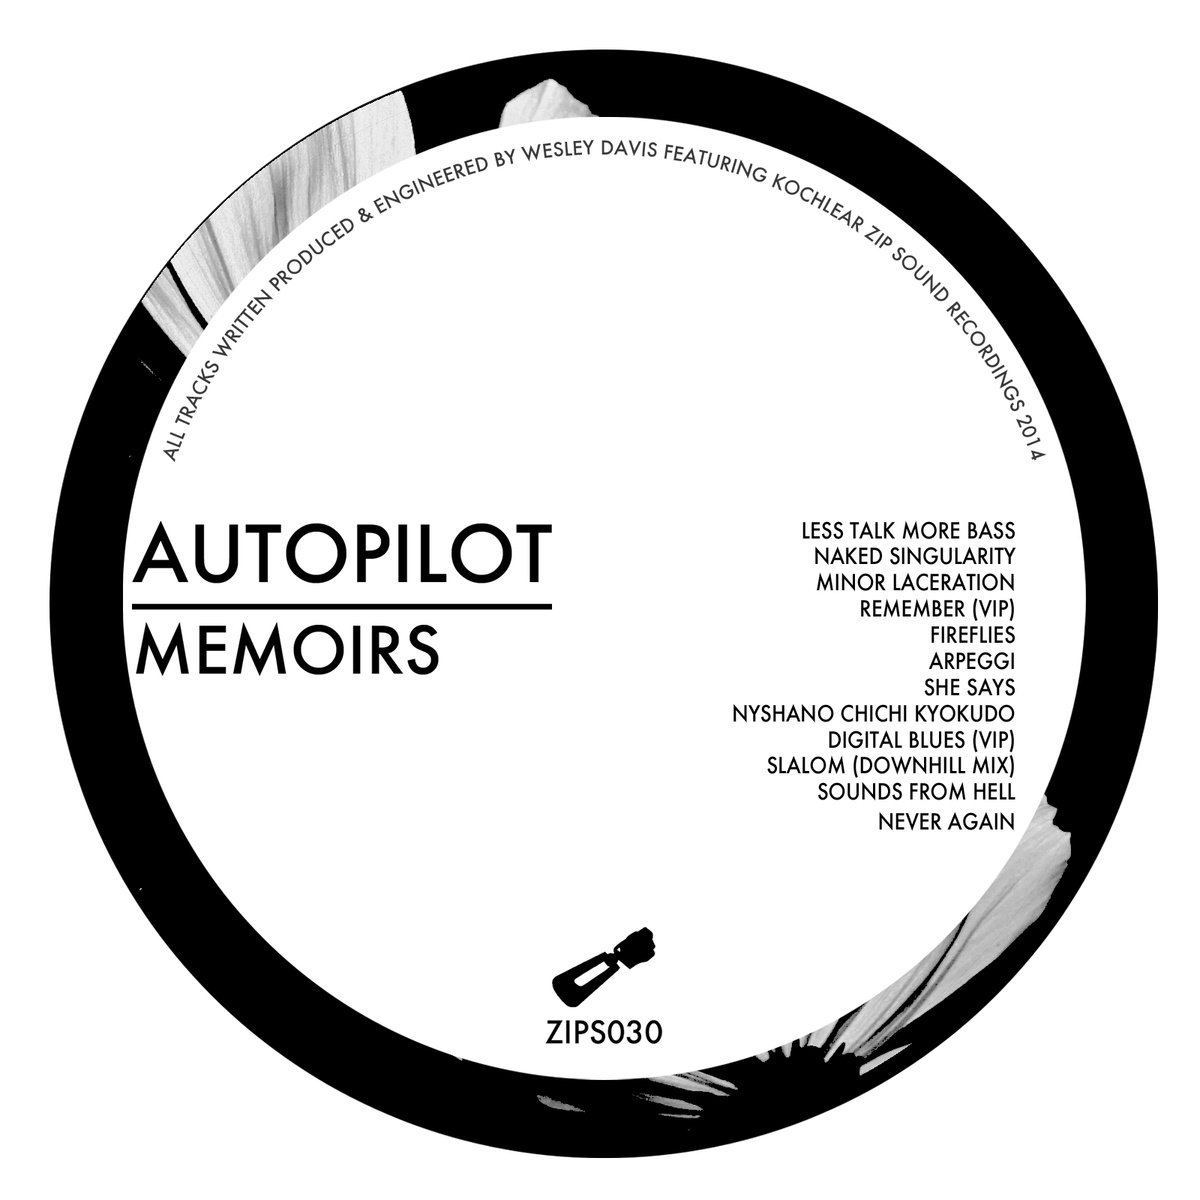 Less talk more. Autopilot обложка альбома. Обложка мемуар дизайн. Autopilot обложка альбома House of Stairs. Never again фото с альбома.